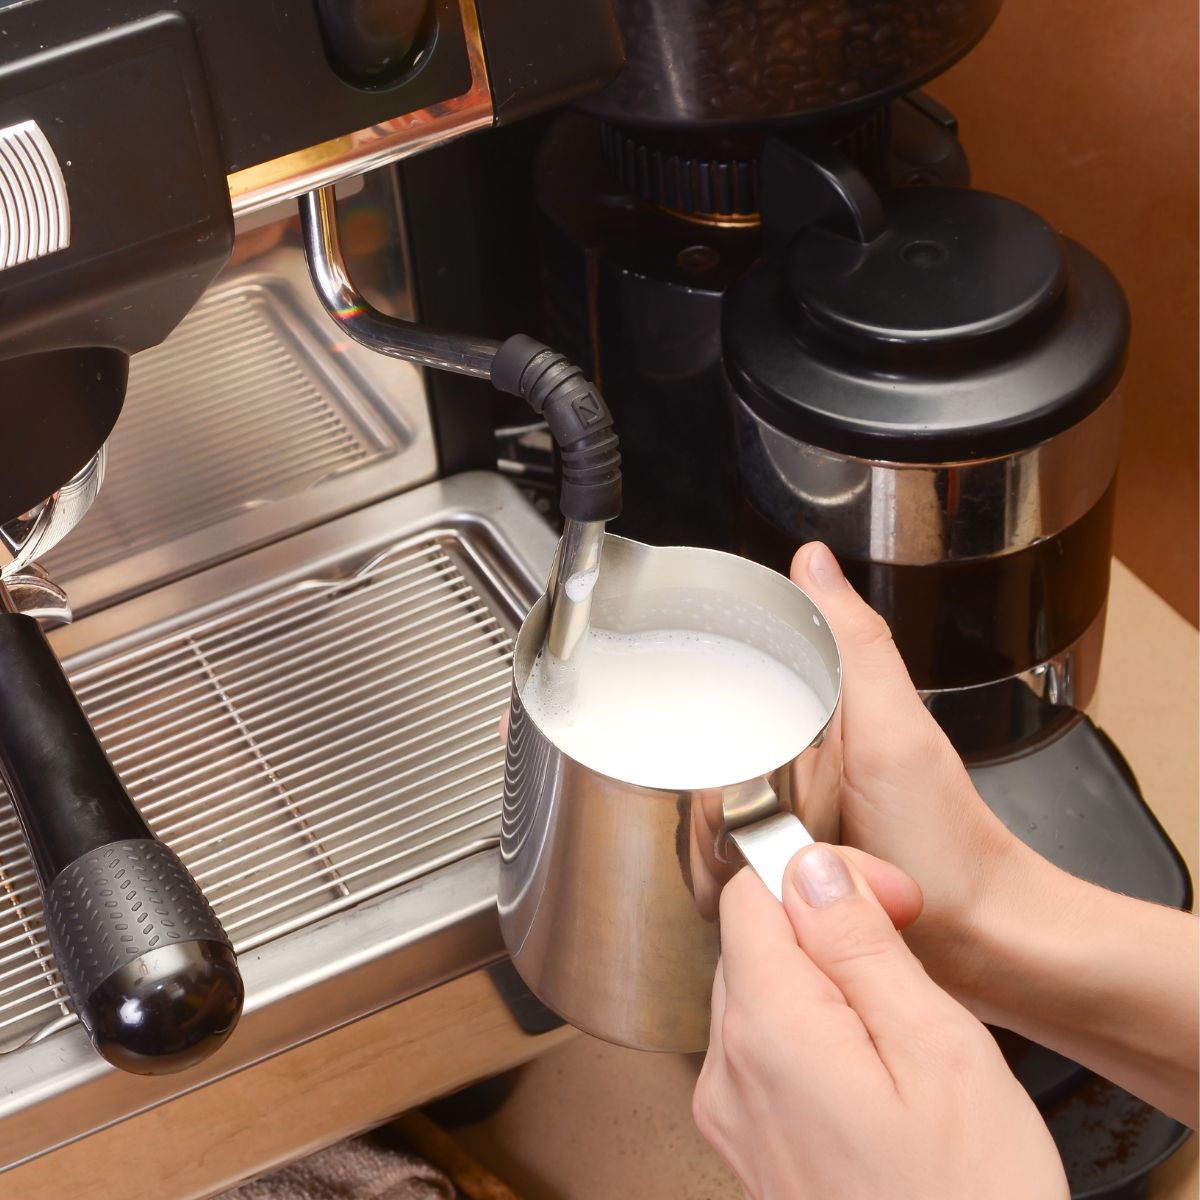 Aeroccino vs. Steam Wand - Is the Milk Frother Better Than the